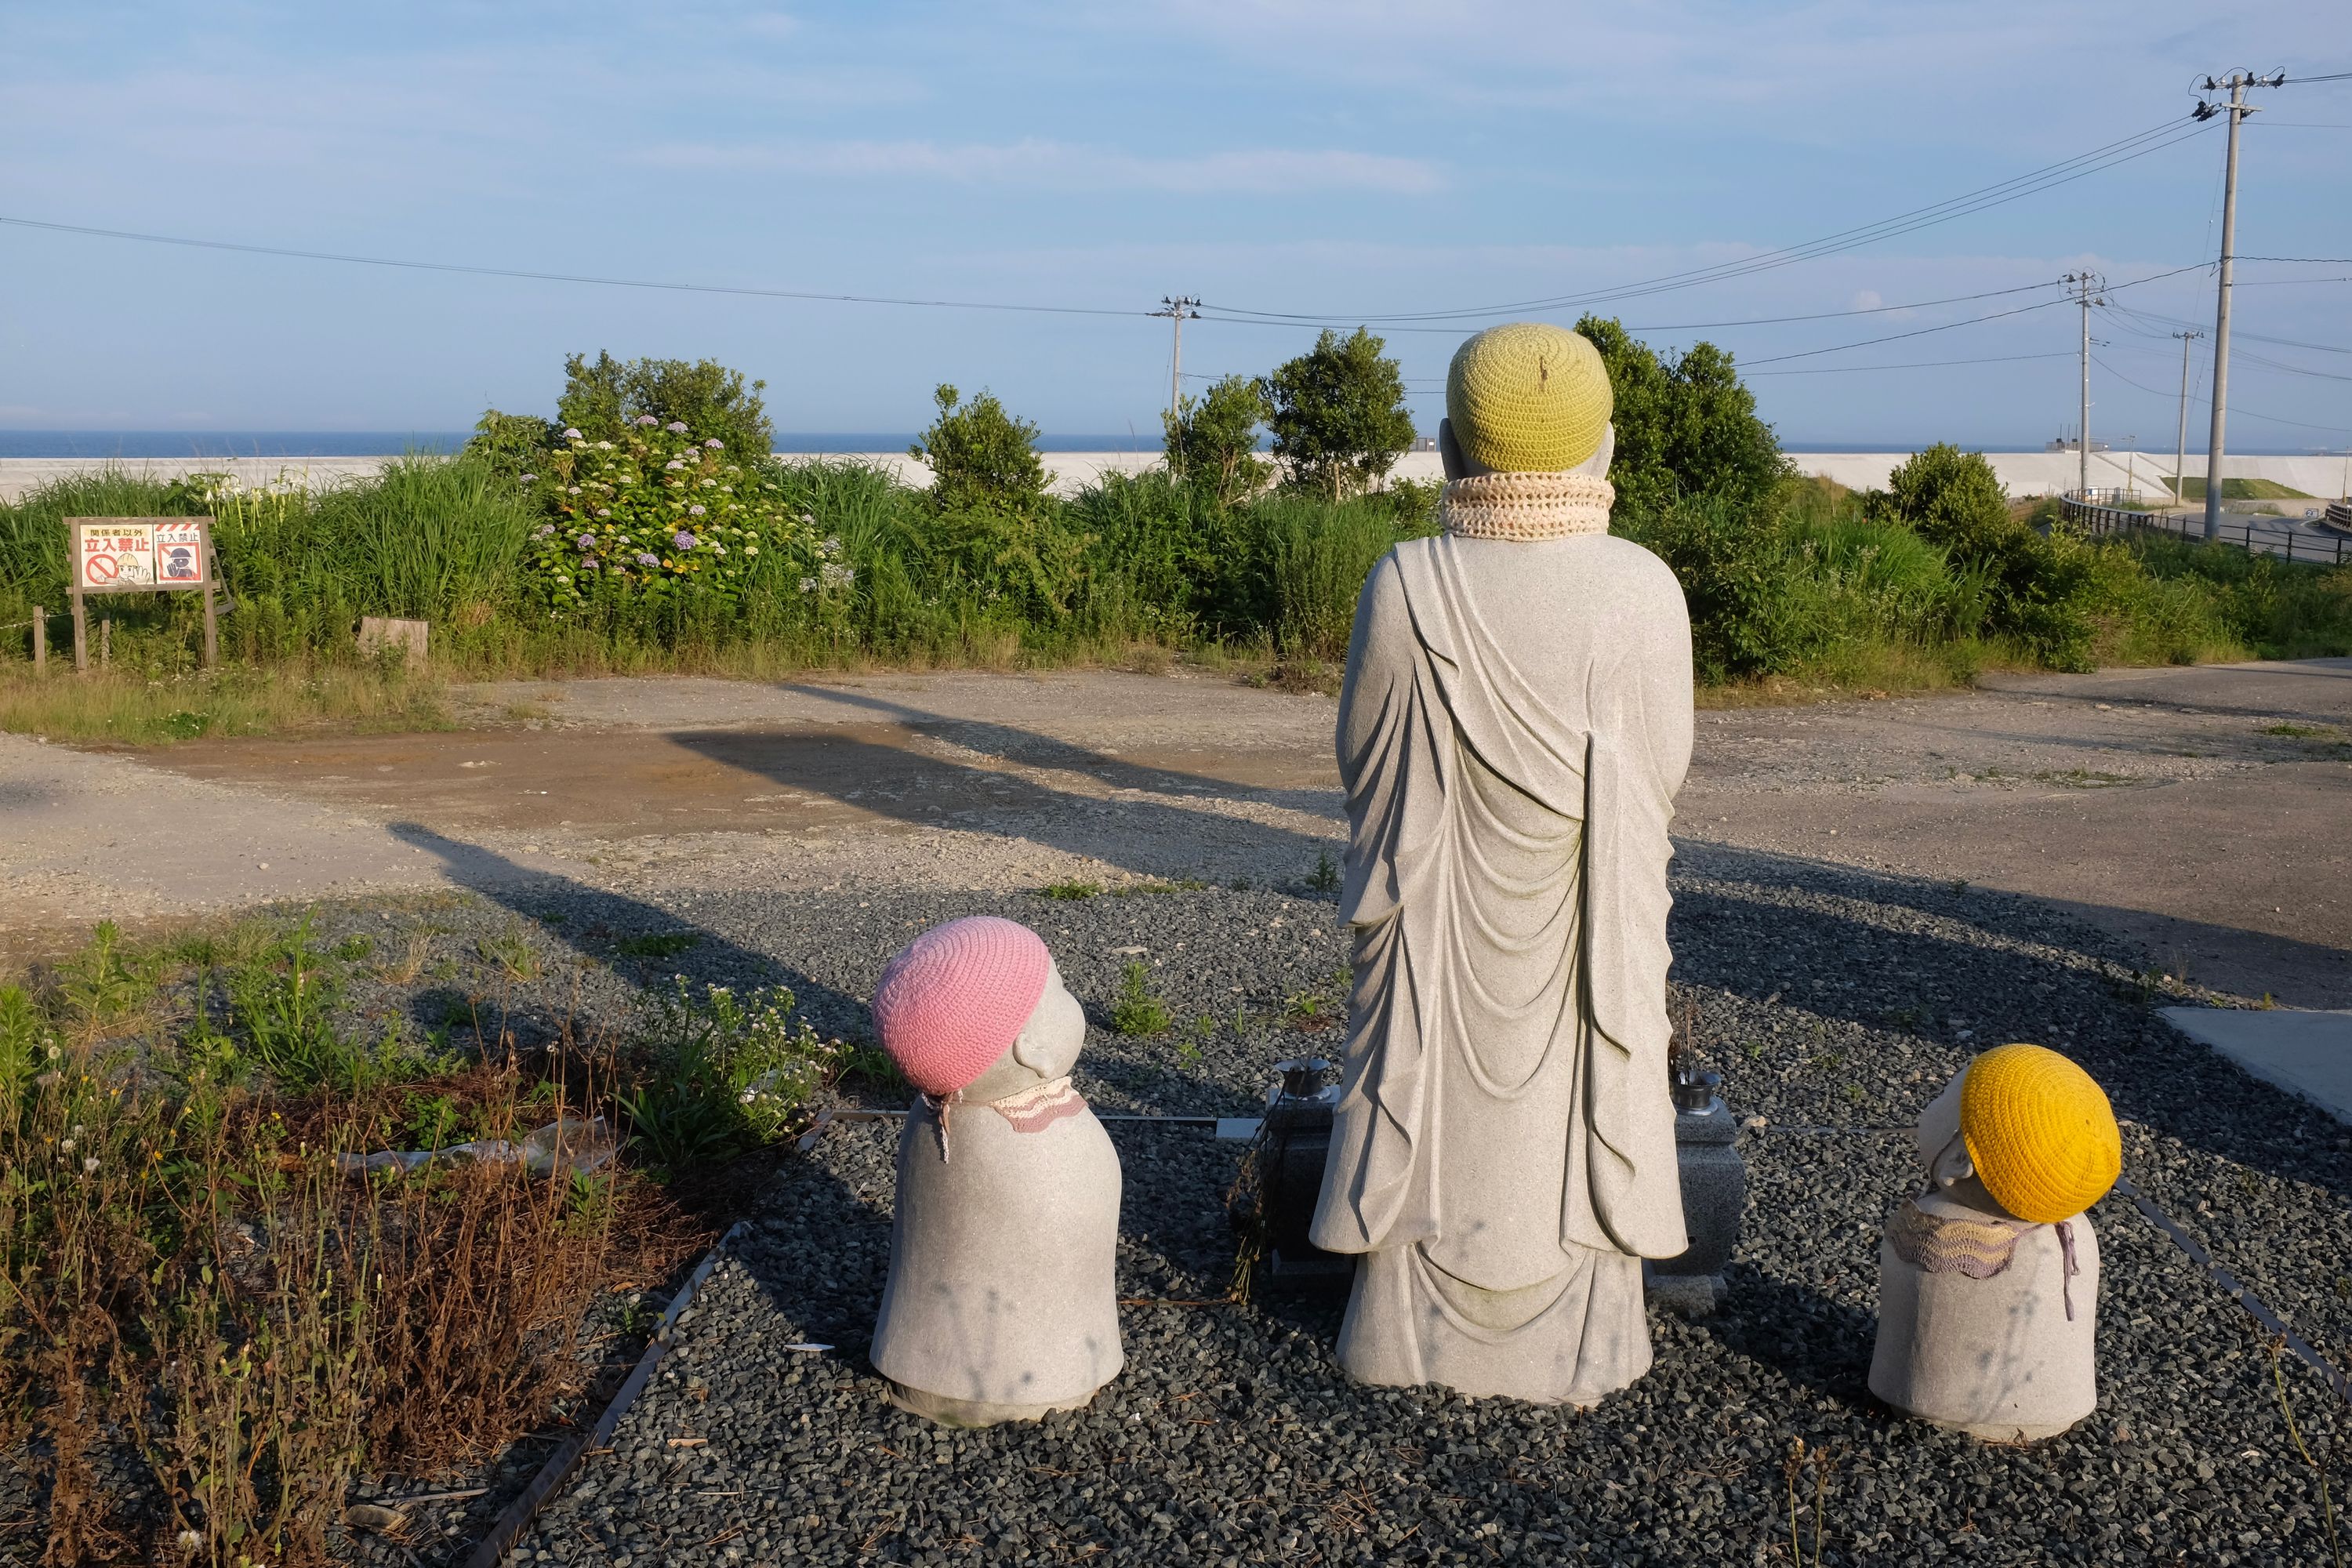 Three Buddhist statues in knit caps facing towards the ocean.